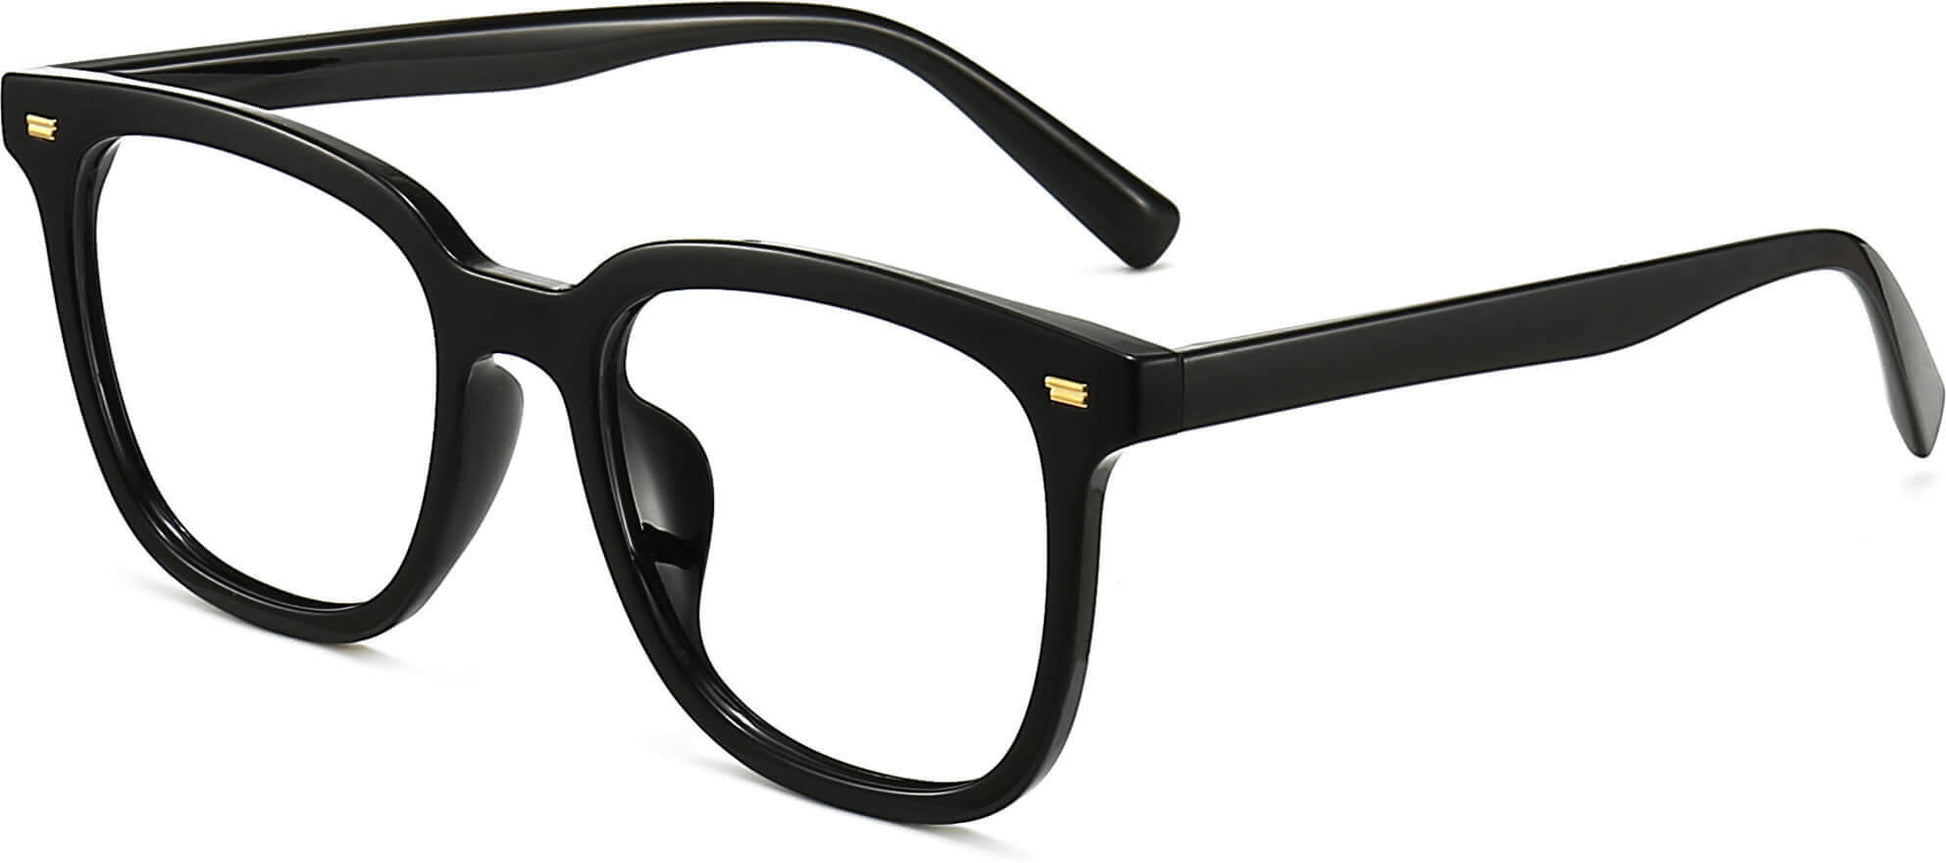 Catalina Square Black Eyeglasses from ANRRI, angle view